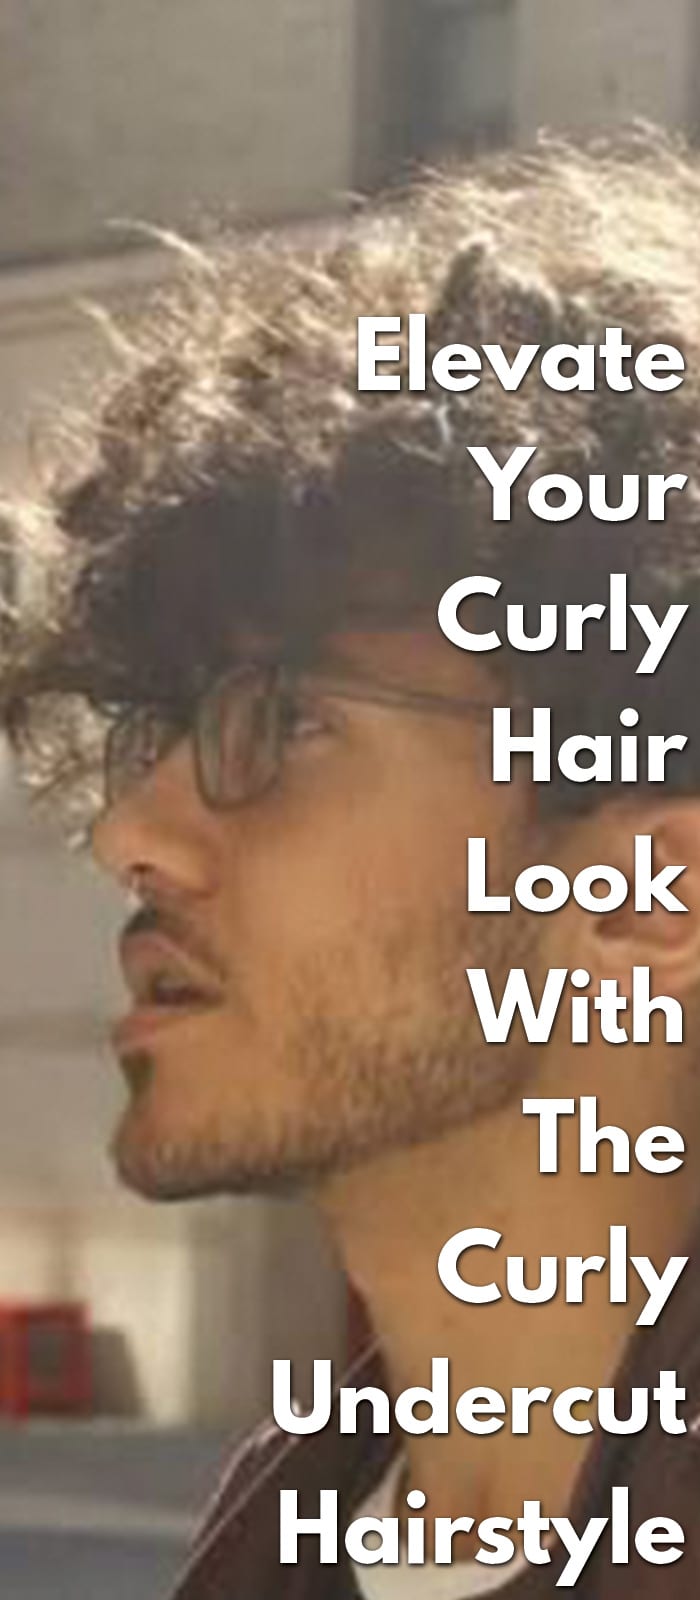 Your Curly Hair Look With The Curly Undercut